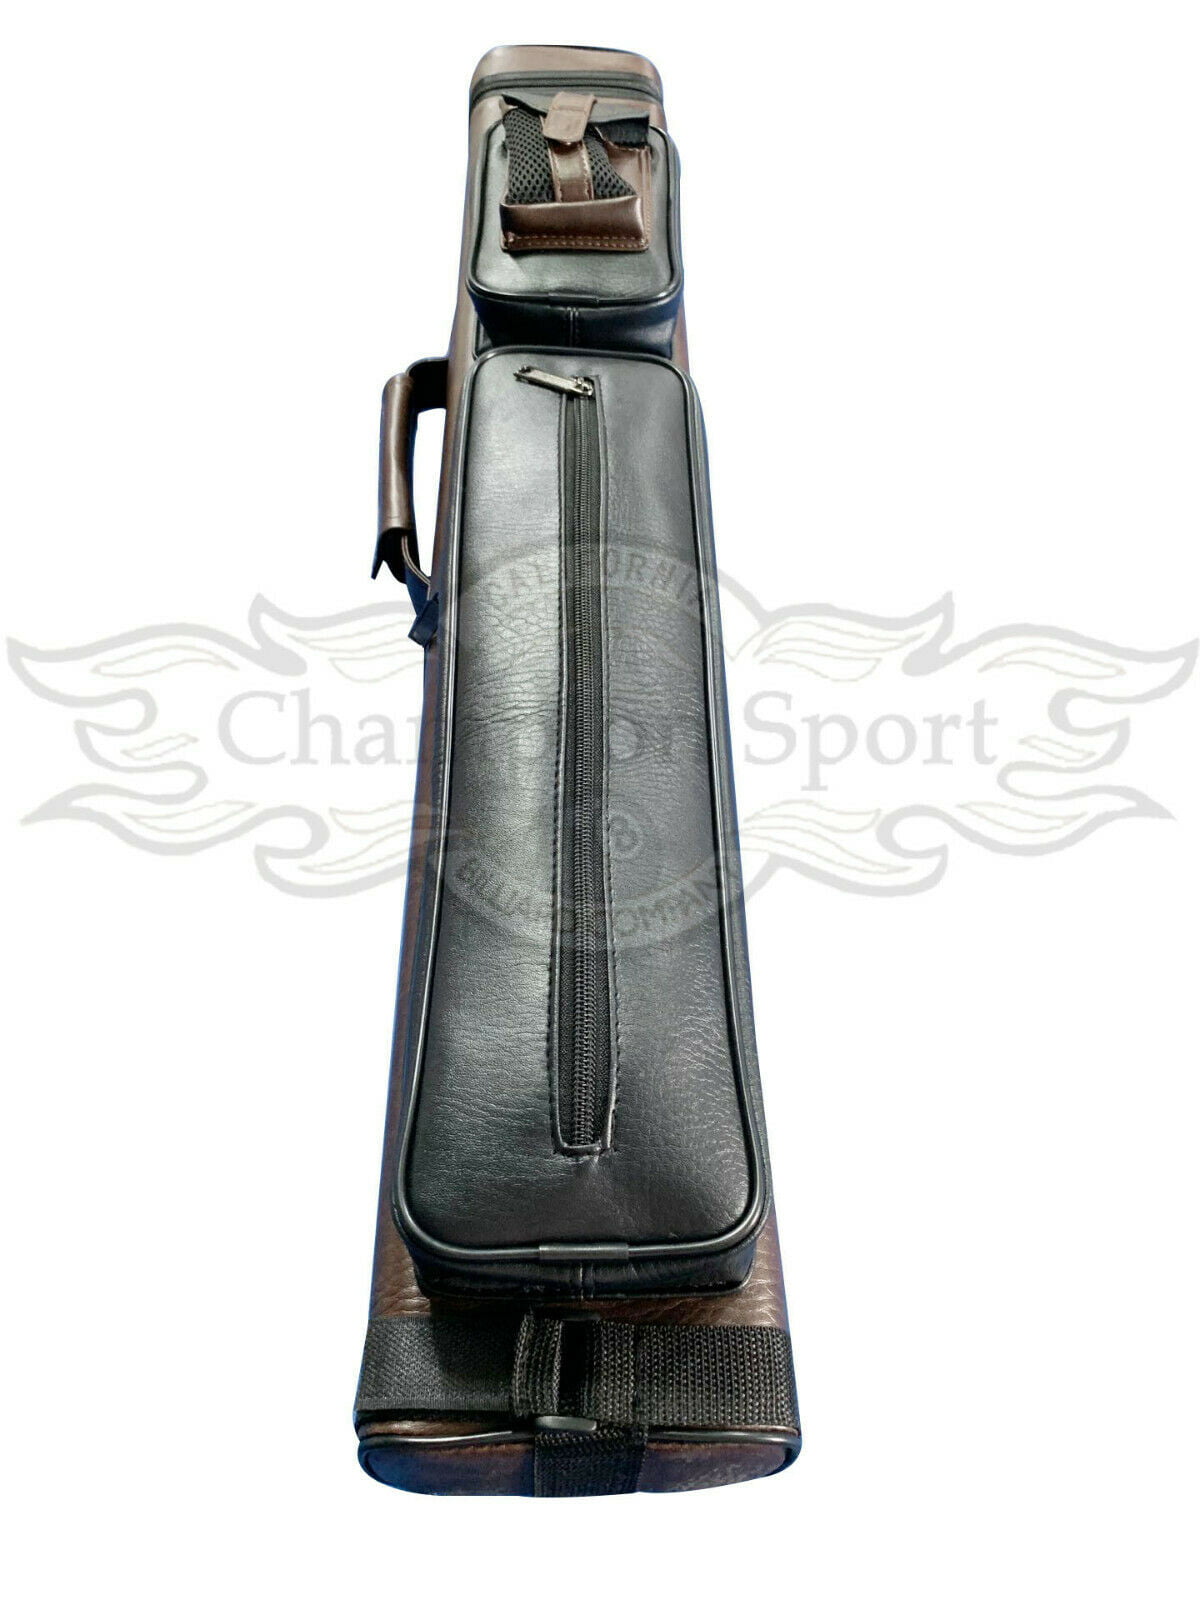 Gator 2020 New Champion Instroke Leather Cue Cases 4x6 Holds 4 Butts and 6 shafts Pool cue